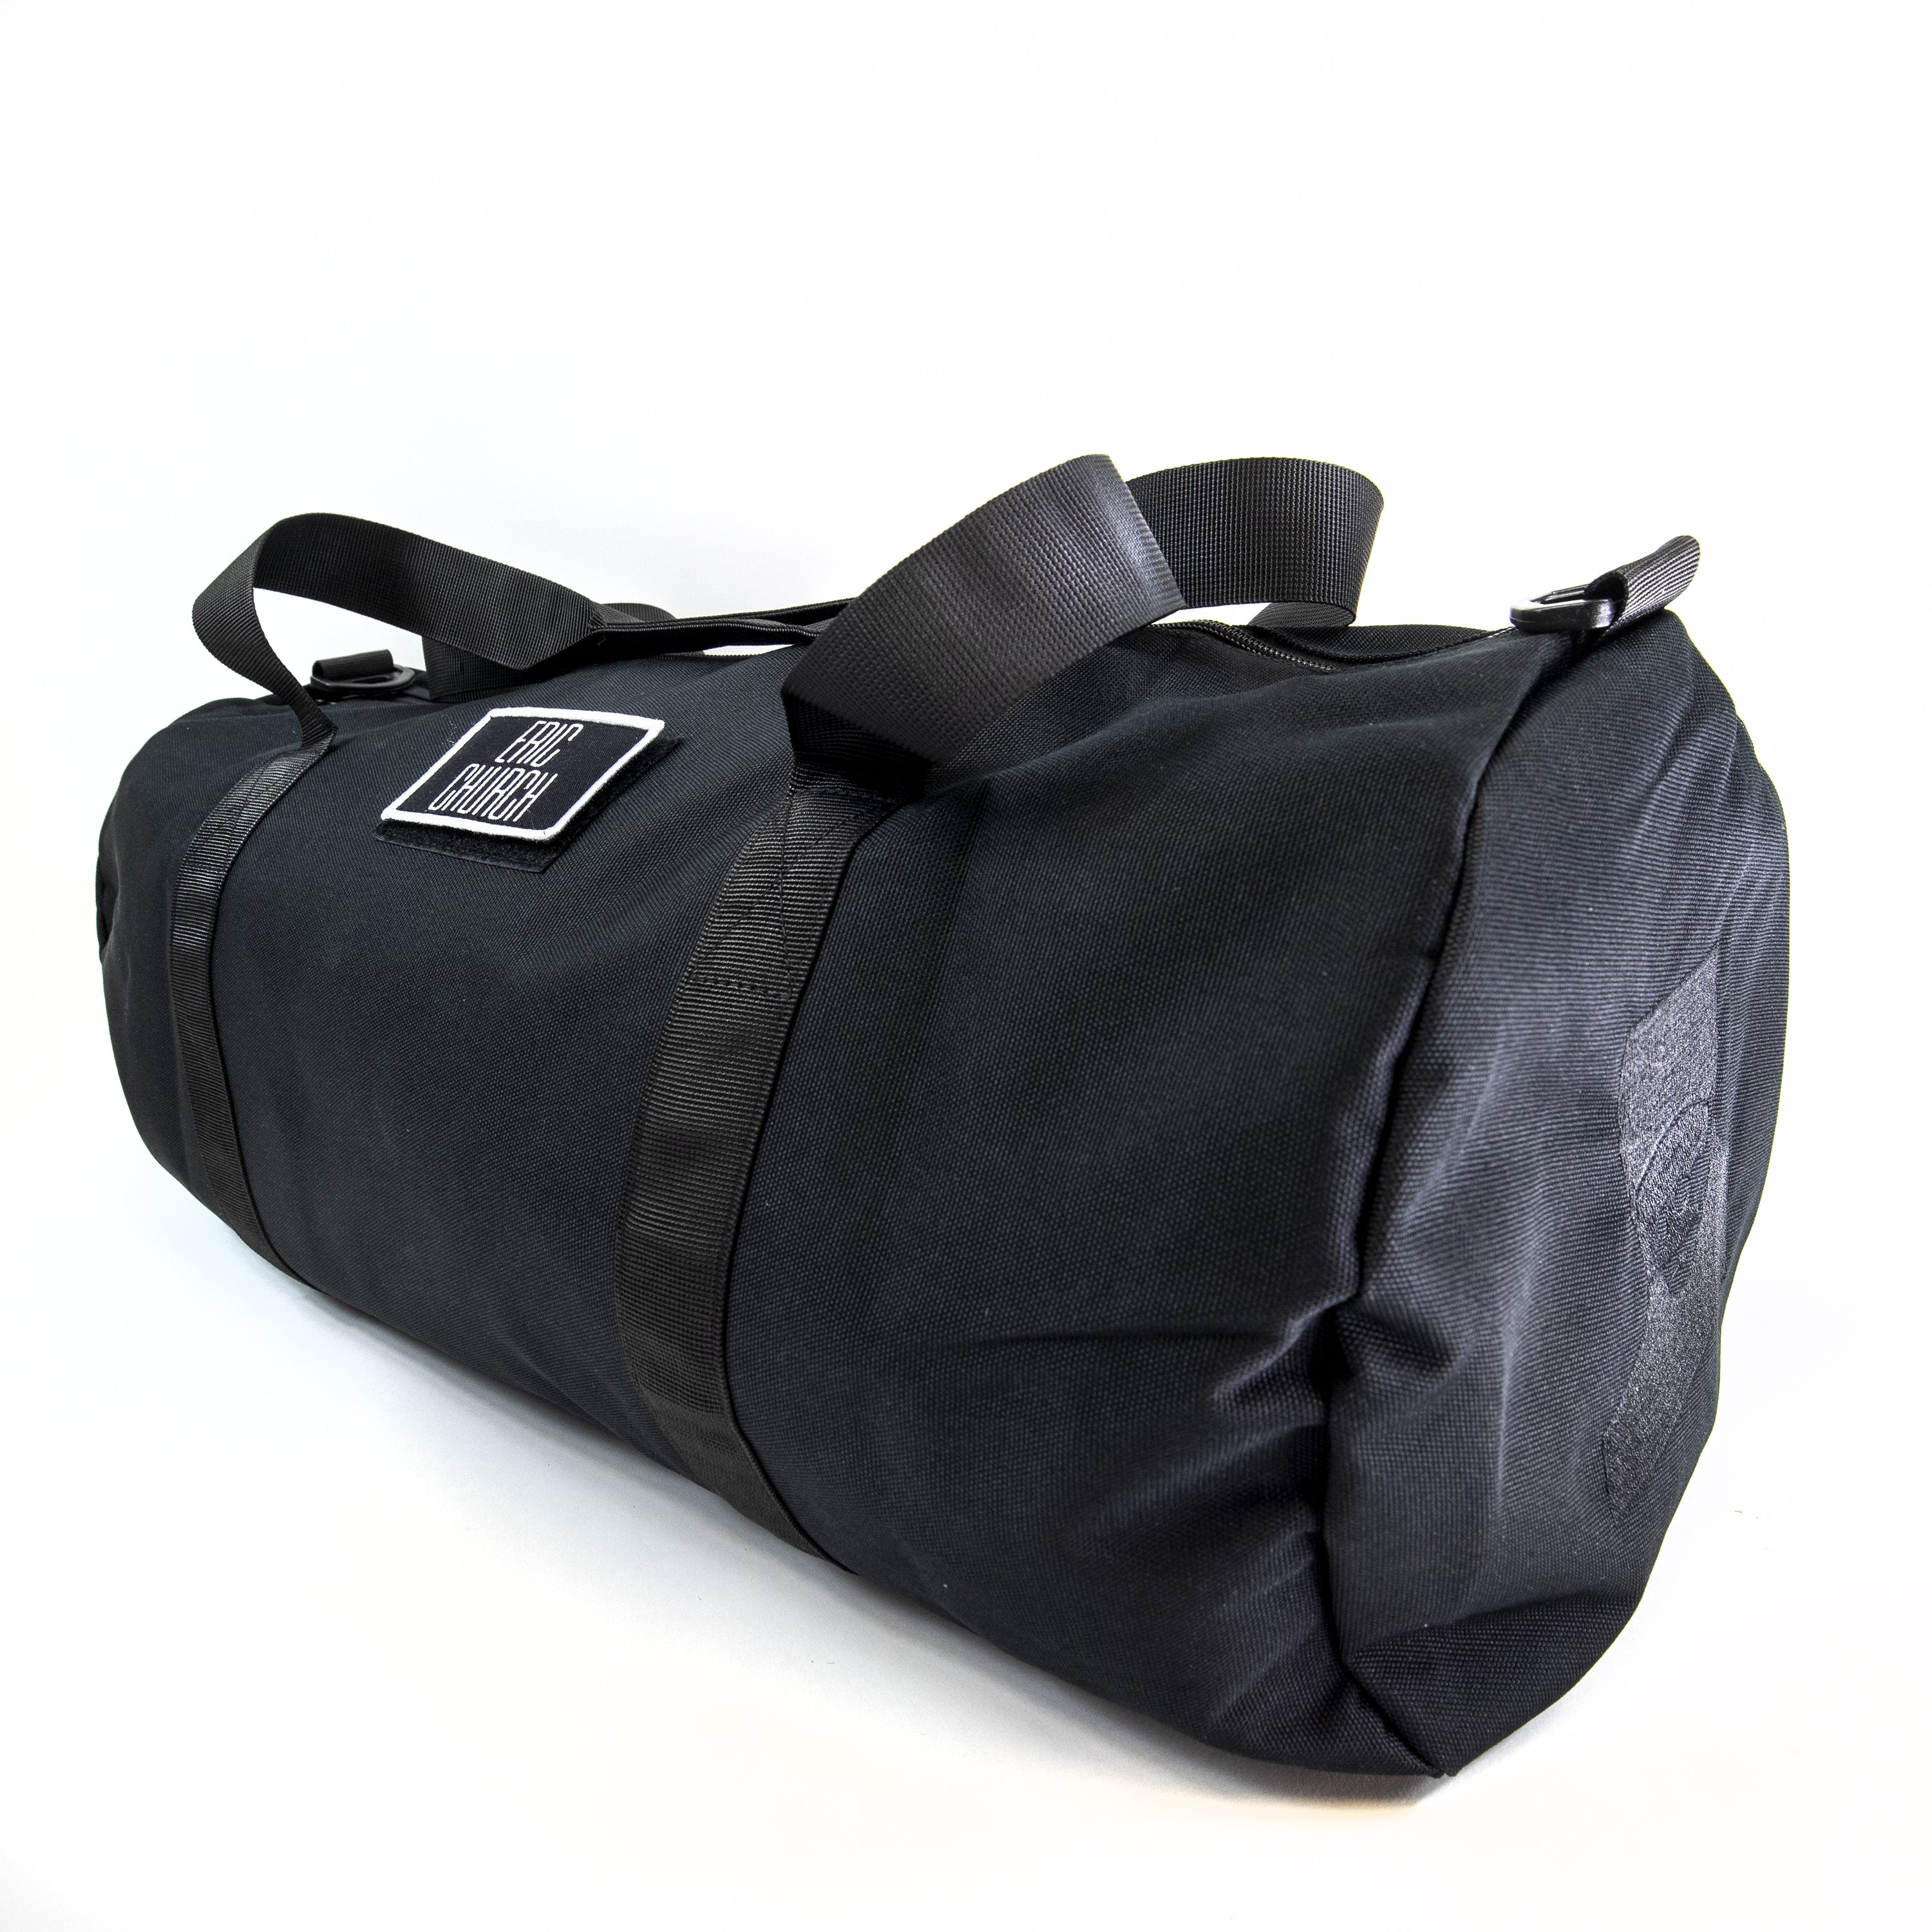 The Chief Duffle Bag